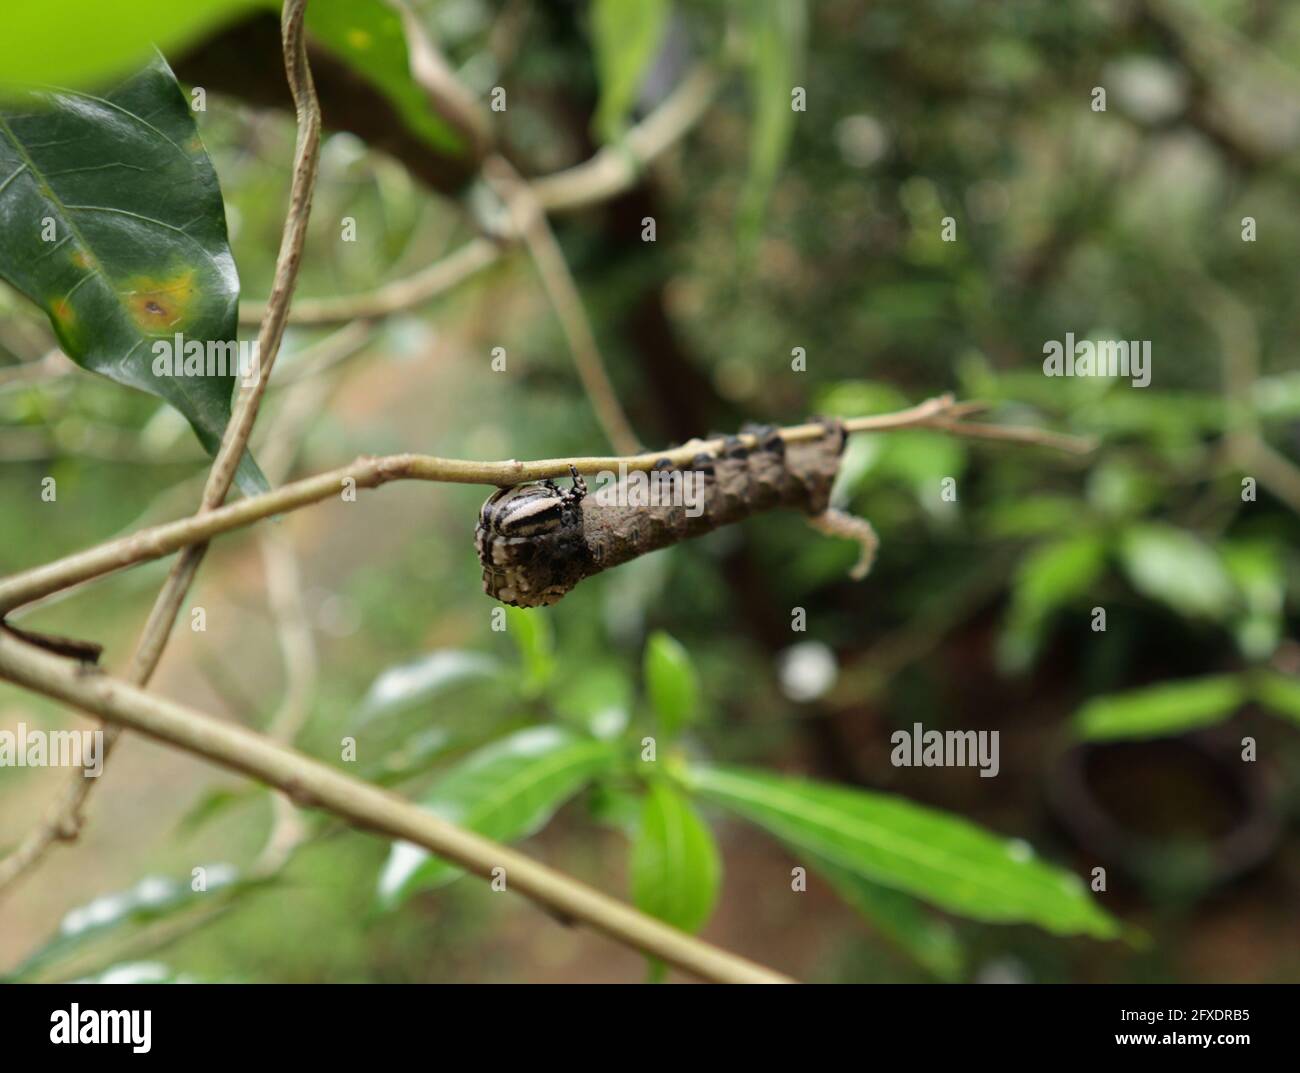 Selective focus on head of a strange shape brown caterpillar on a branch Stock Photo